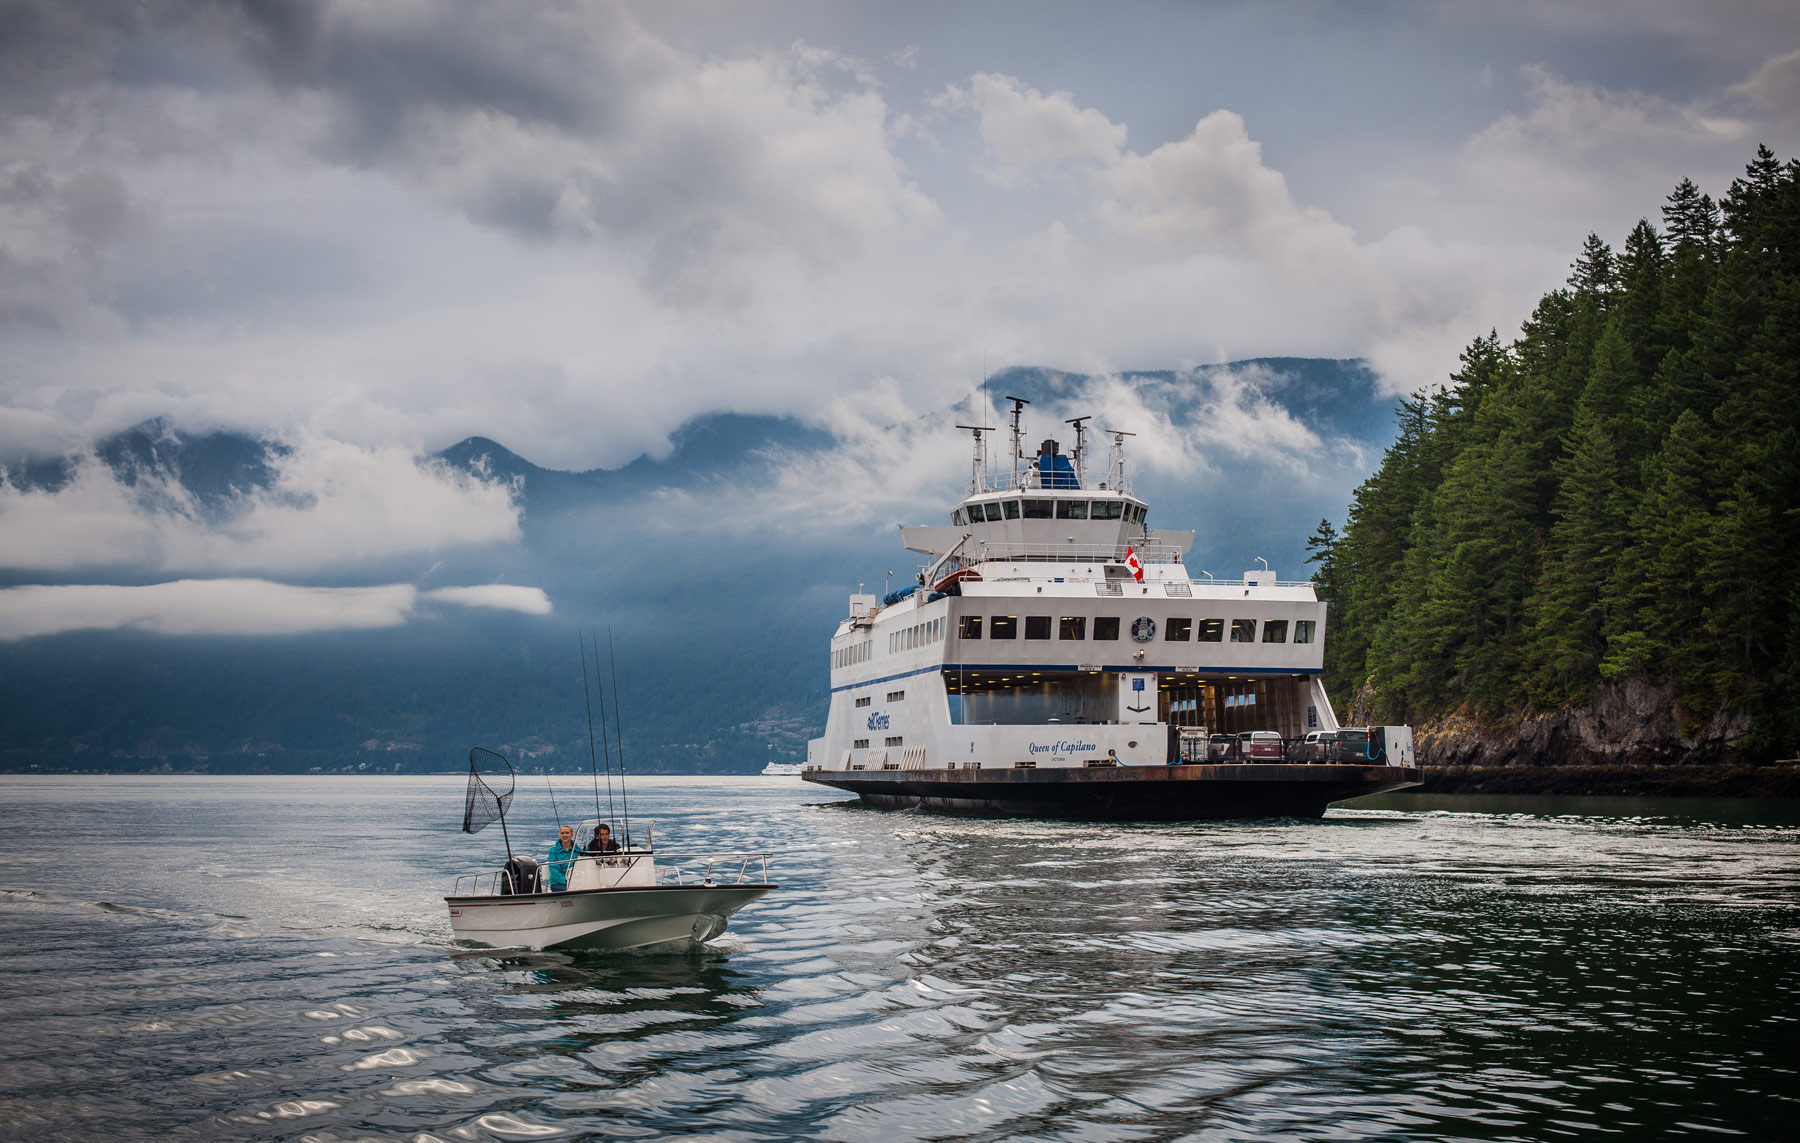 Canada Boating Photographer Richard Steinberger